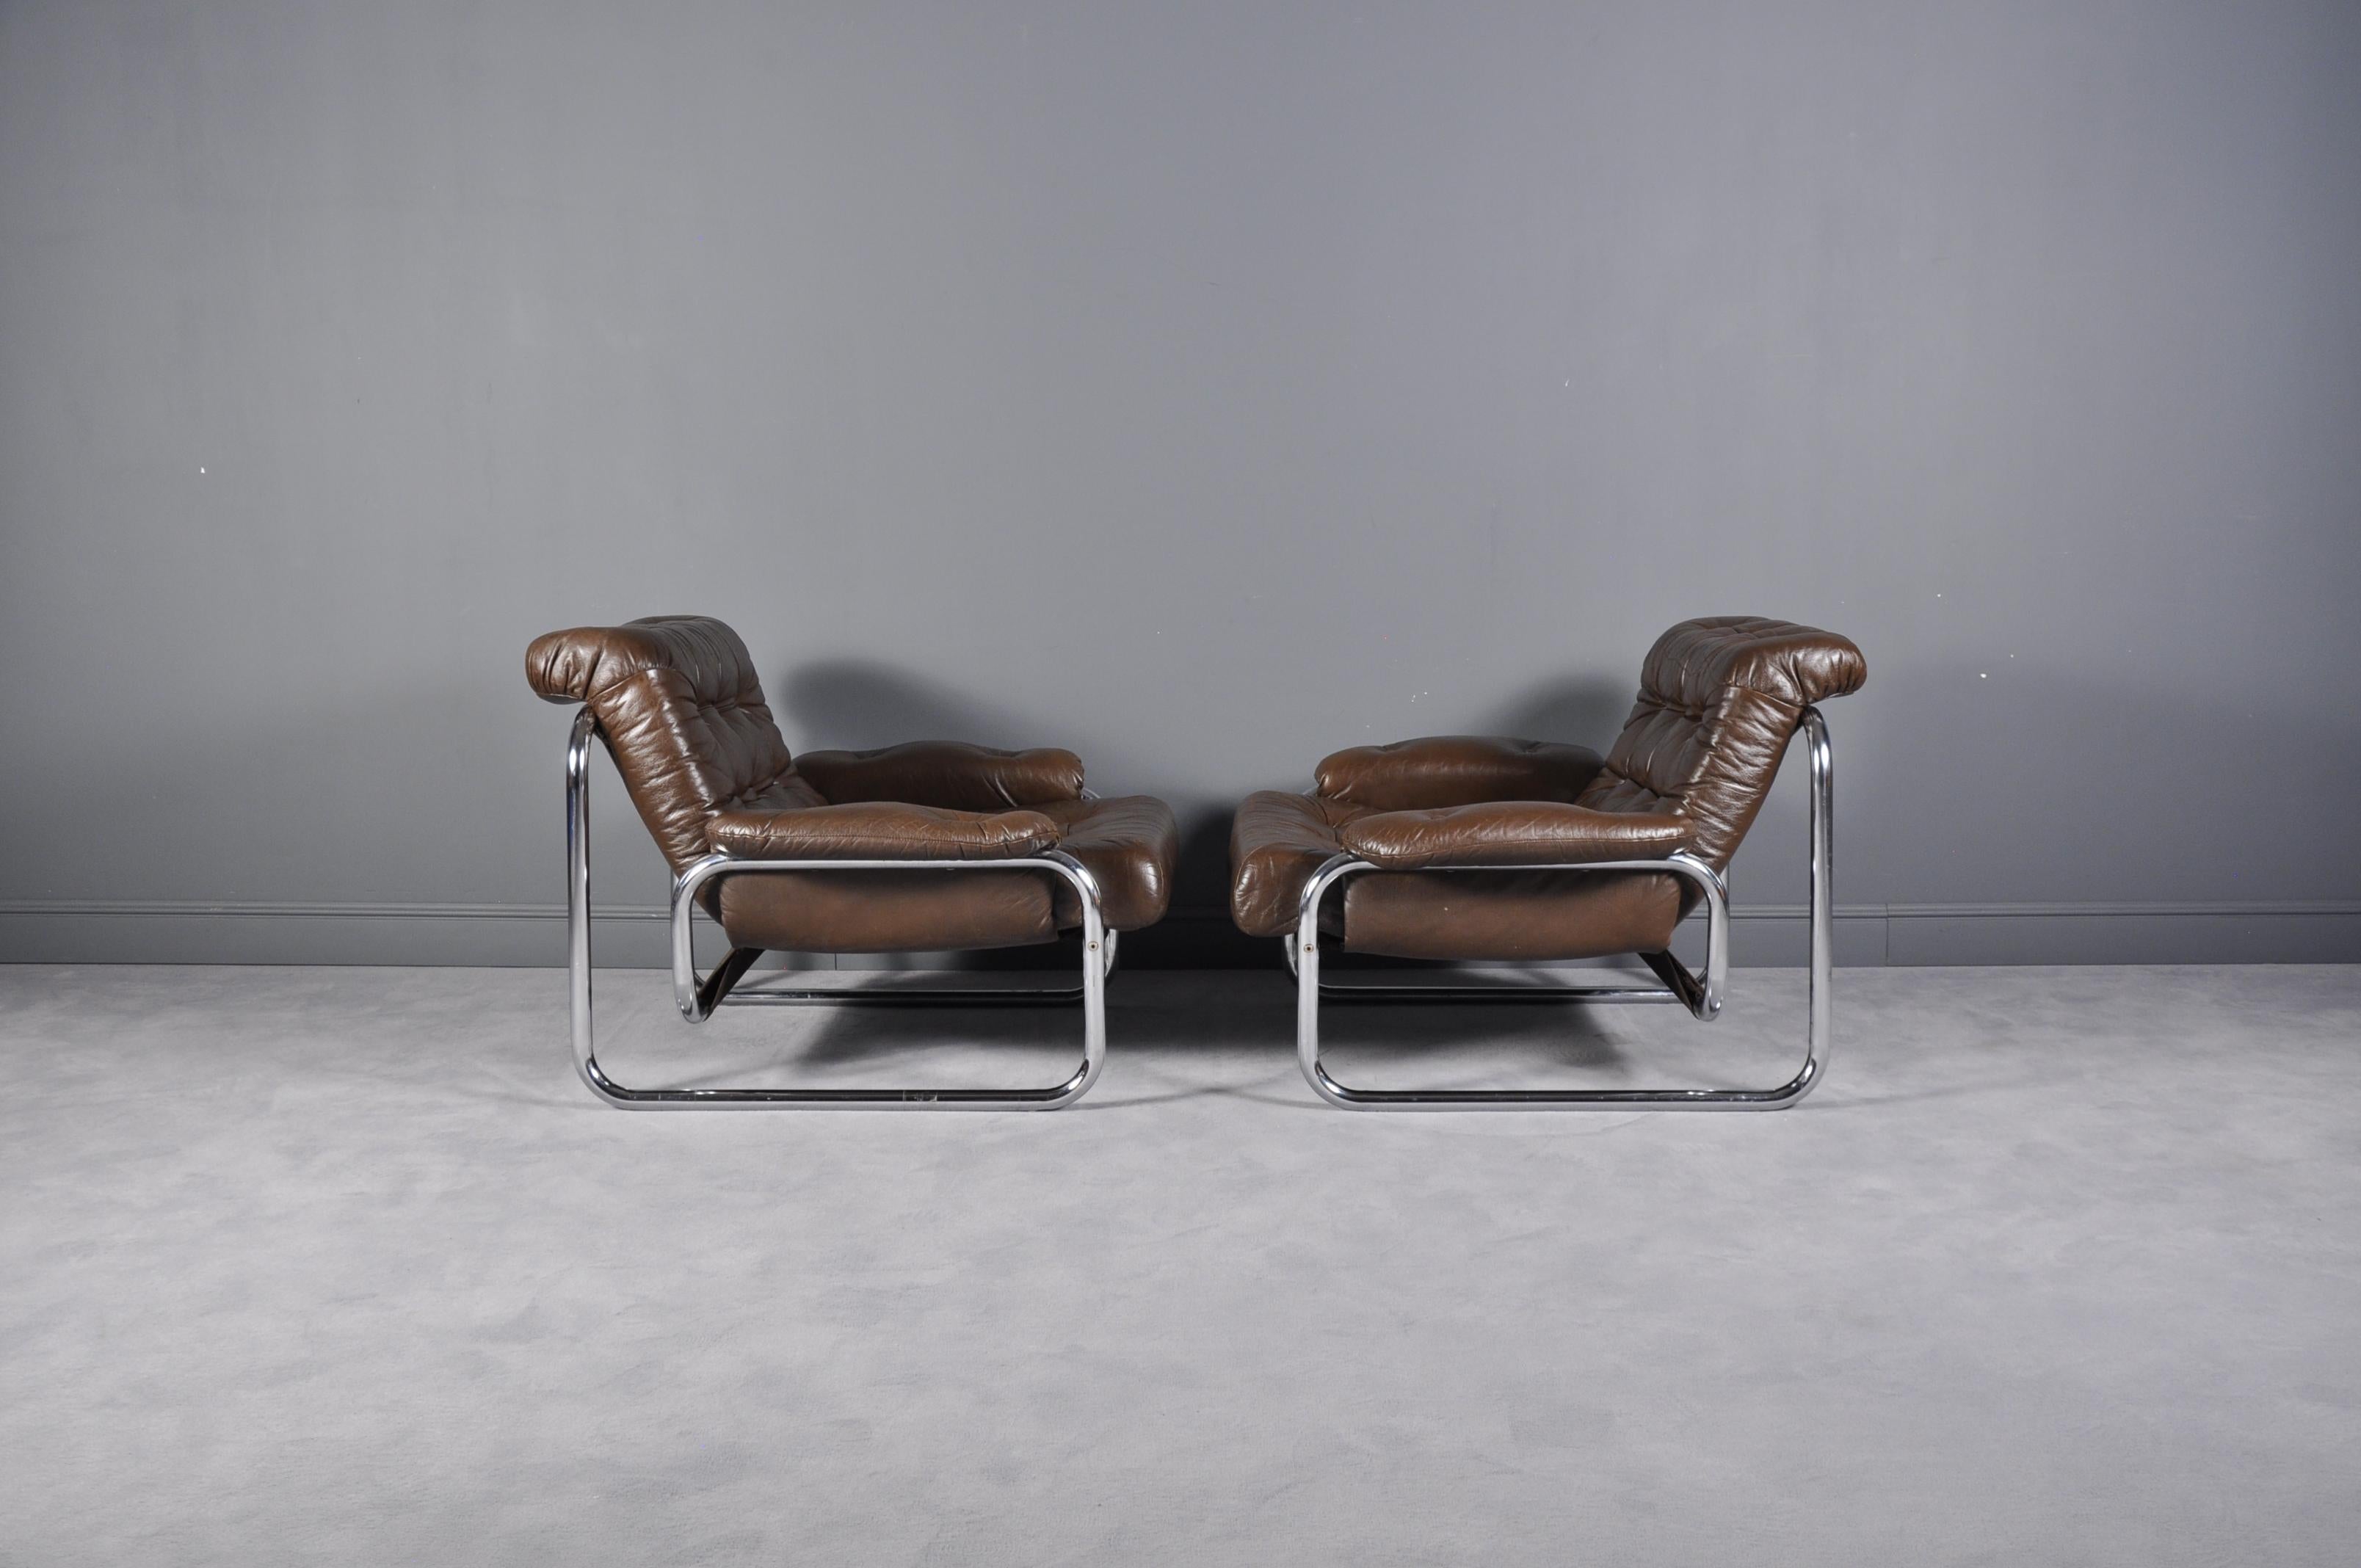 Pair of Swedish 1970s tubular metal framed lounge chairs with original brown tufted cushion and arm rests. Produced by Ikea, model Troligen, designed by Johan Bertil Häggström.
 